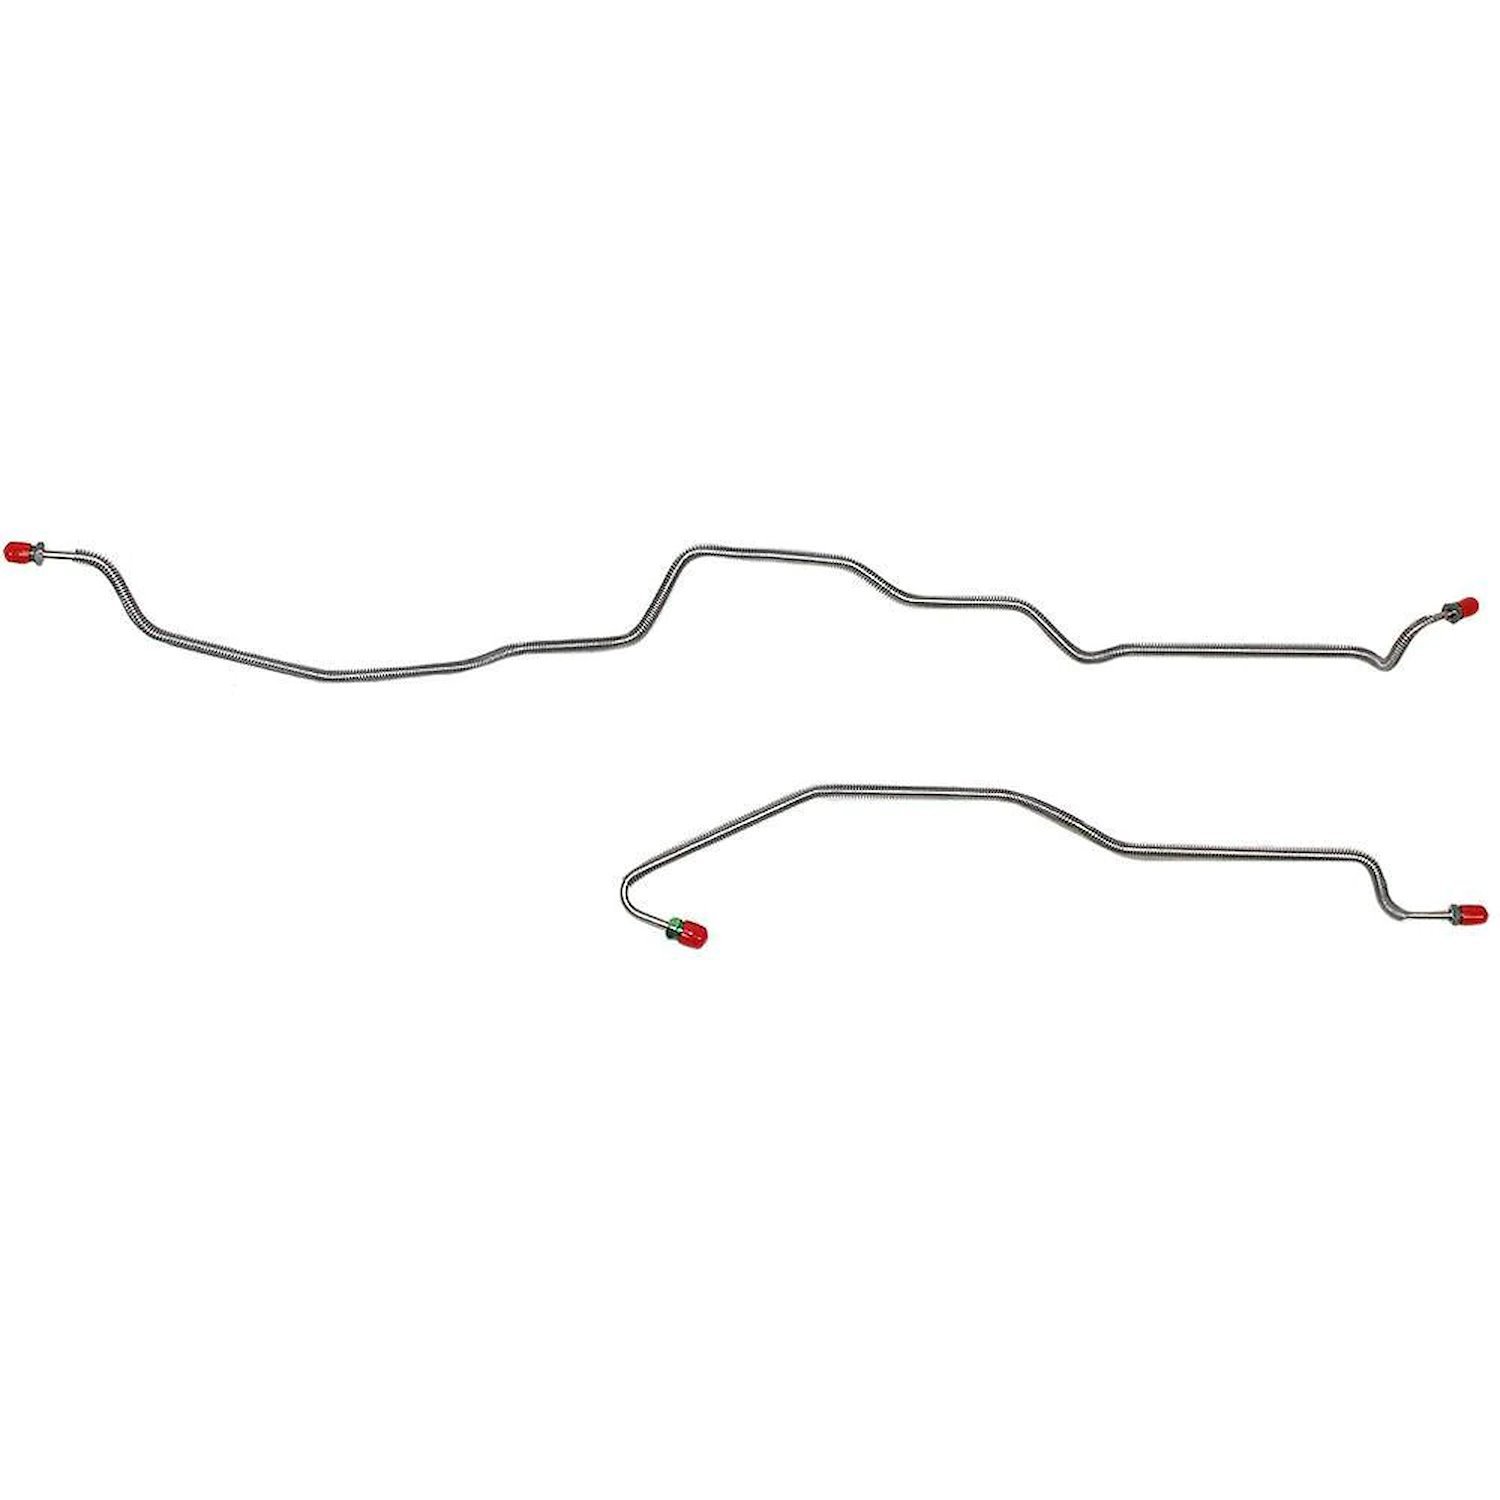 Rear Axle Brake Line Set for 1995-1997 Chevy Camaro, Pontiac Trans Am with Traction Control [2-PC, Steel]